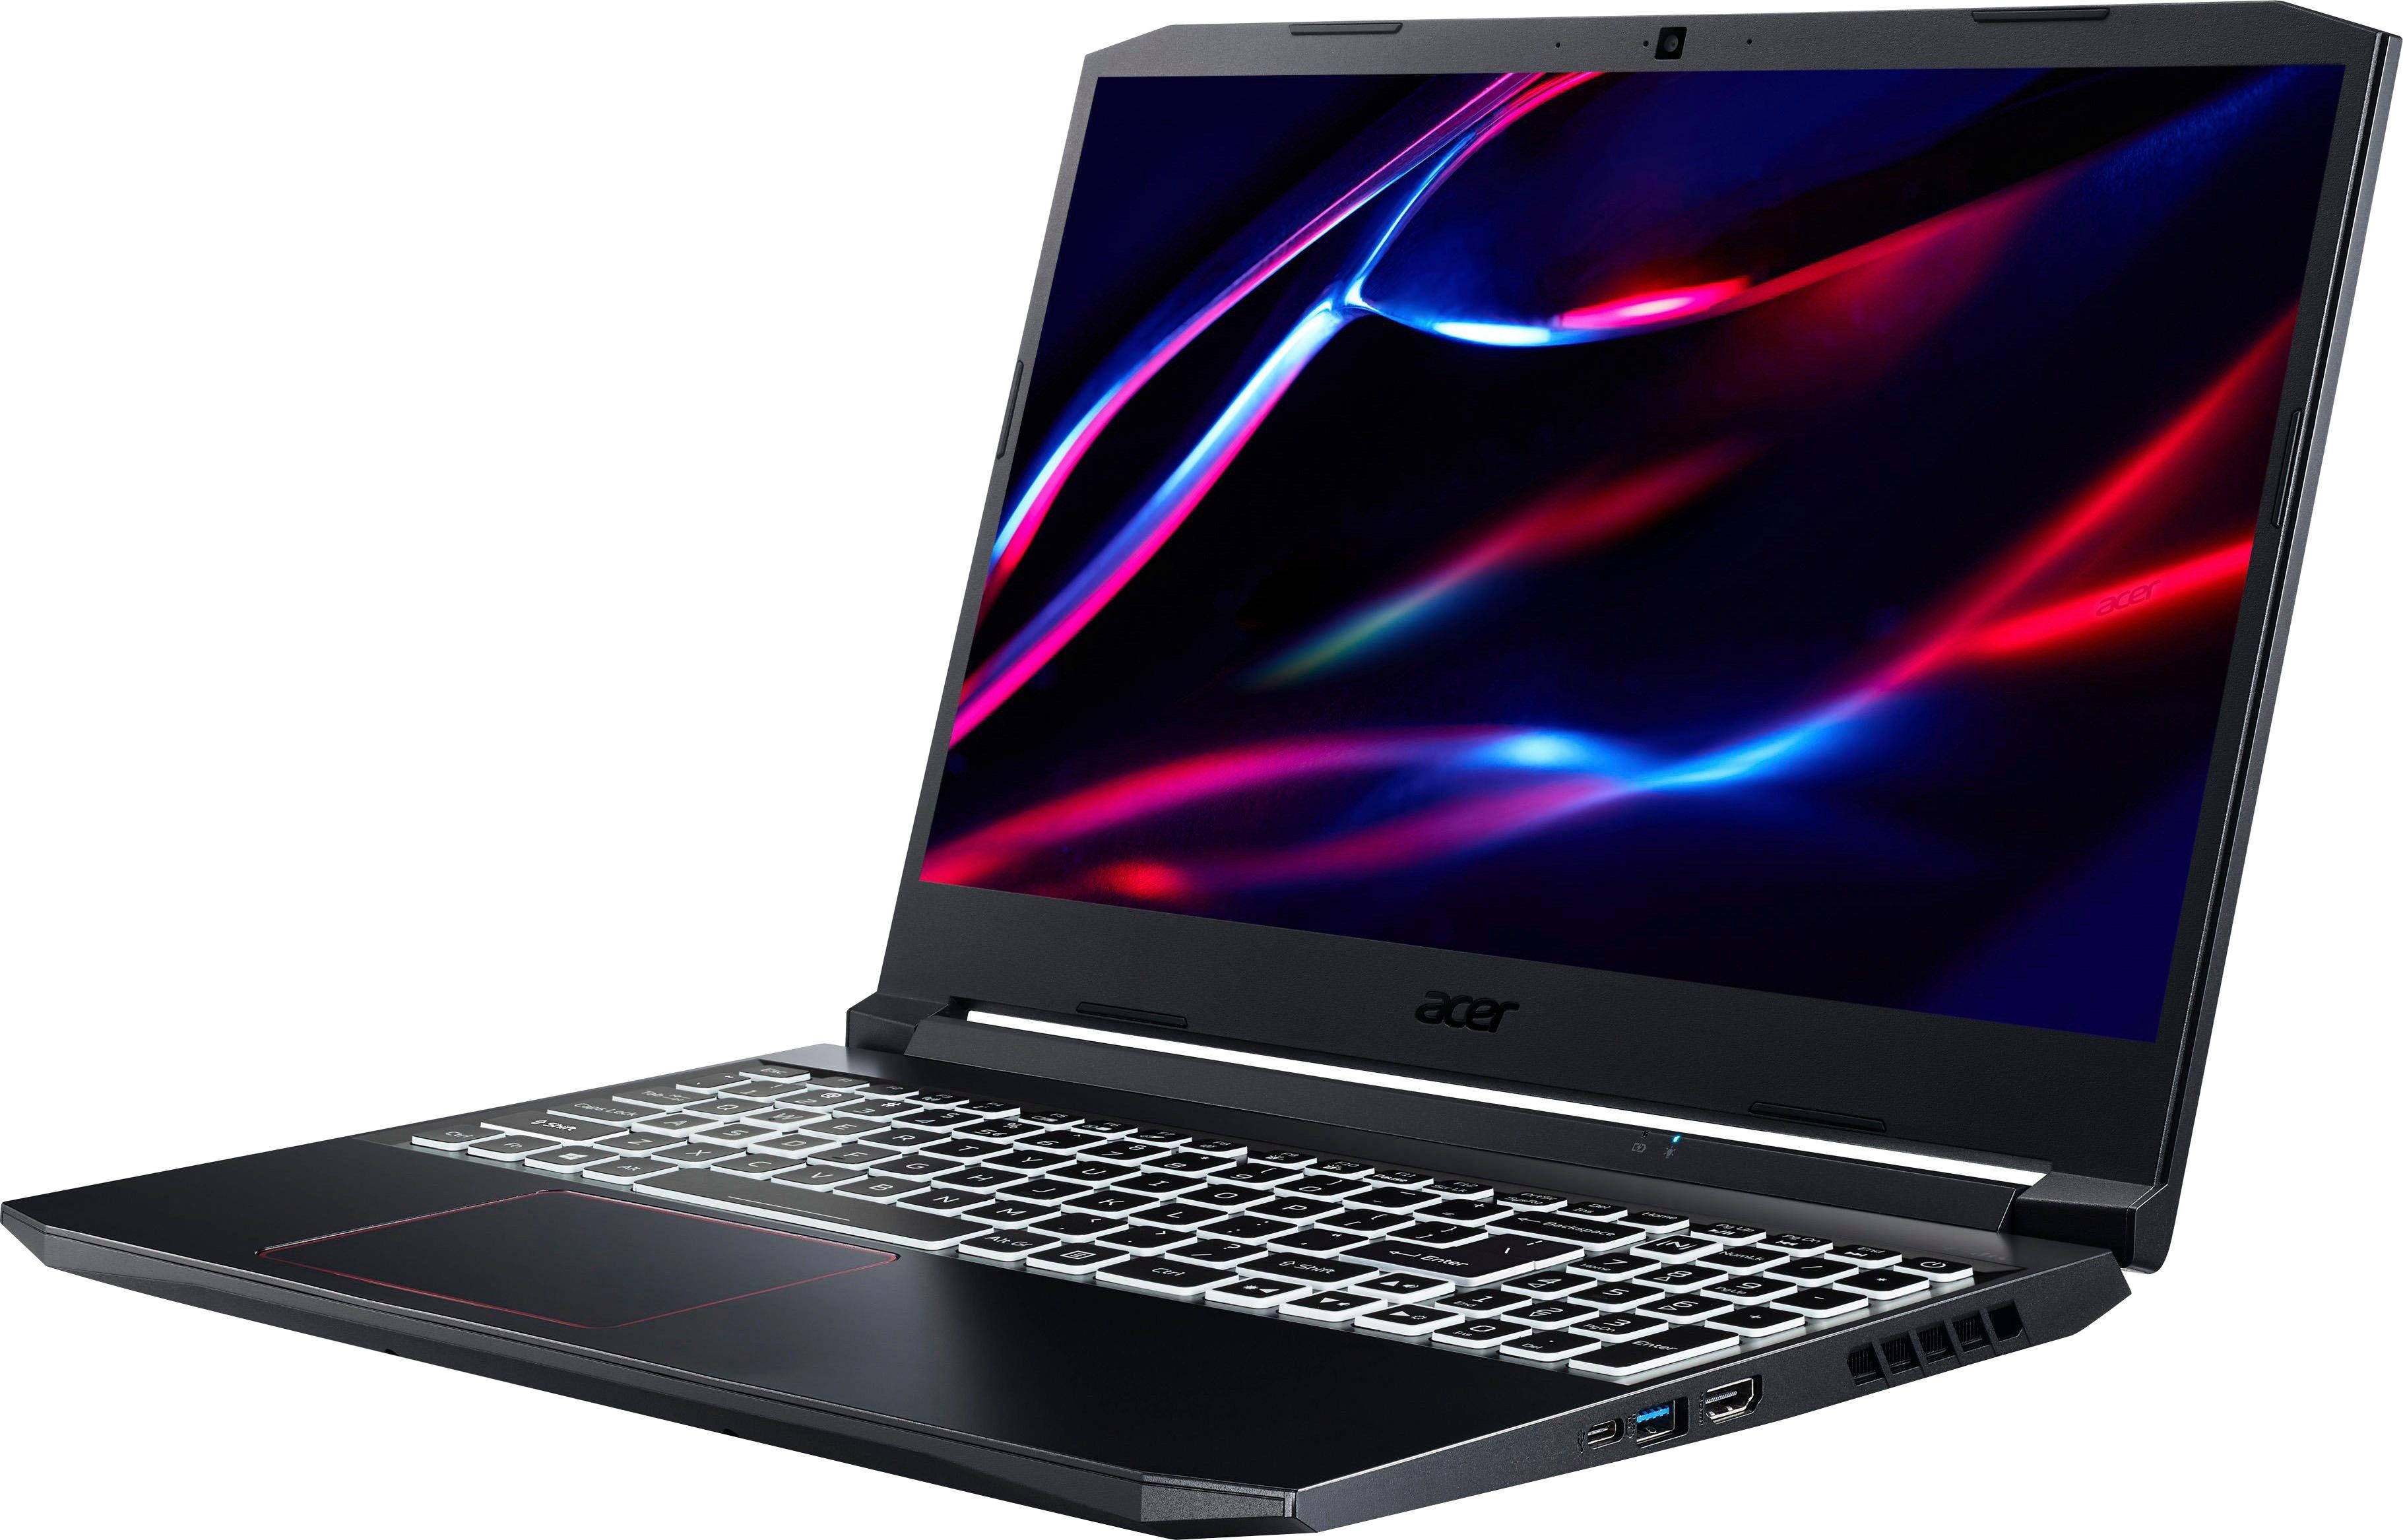 512 Intel Nitro GeForce i7 10750H, Core Gaming-Notebook AN515-55-766W cm/15,6 3060, (39,62 SSD) Acer GB 5 RTX Zoll,